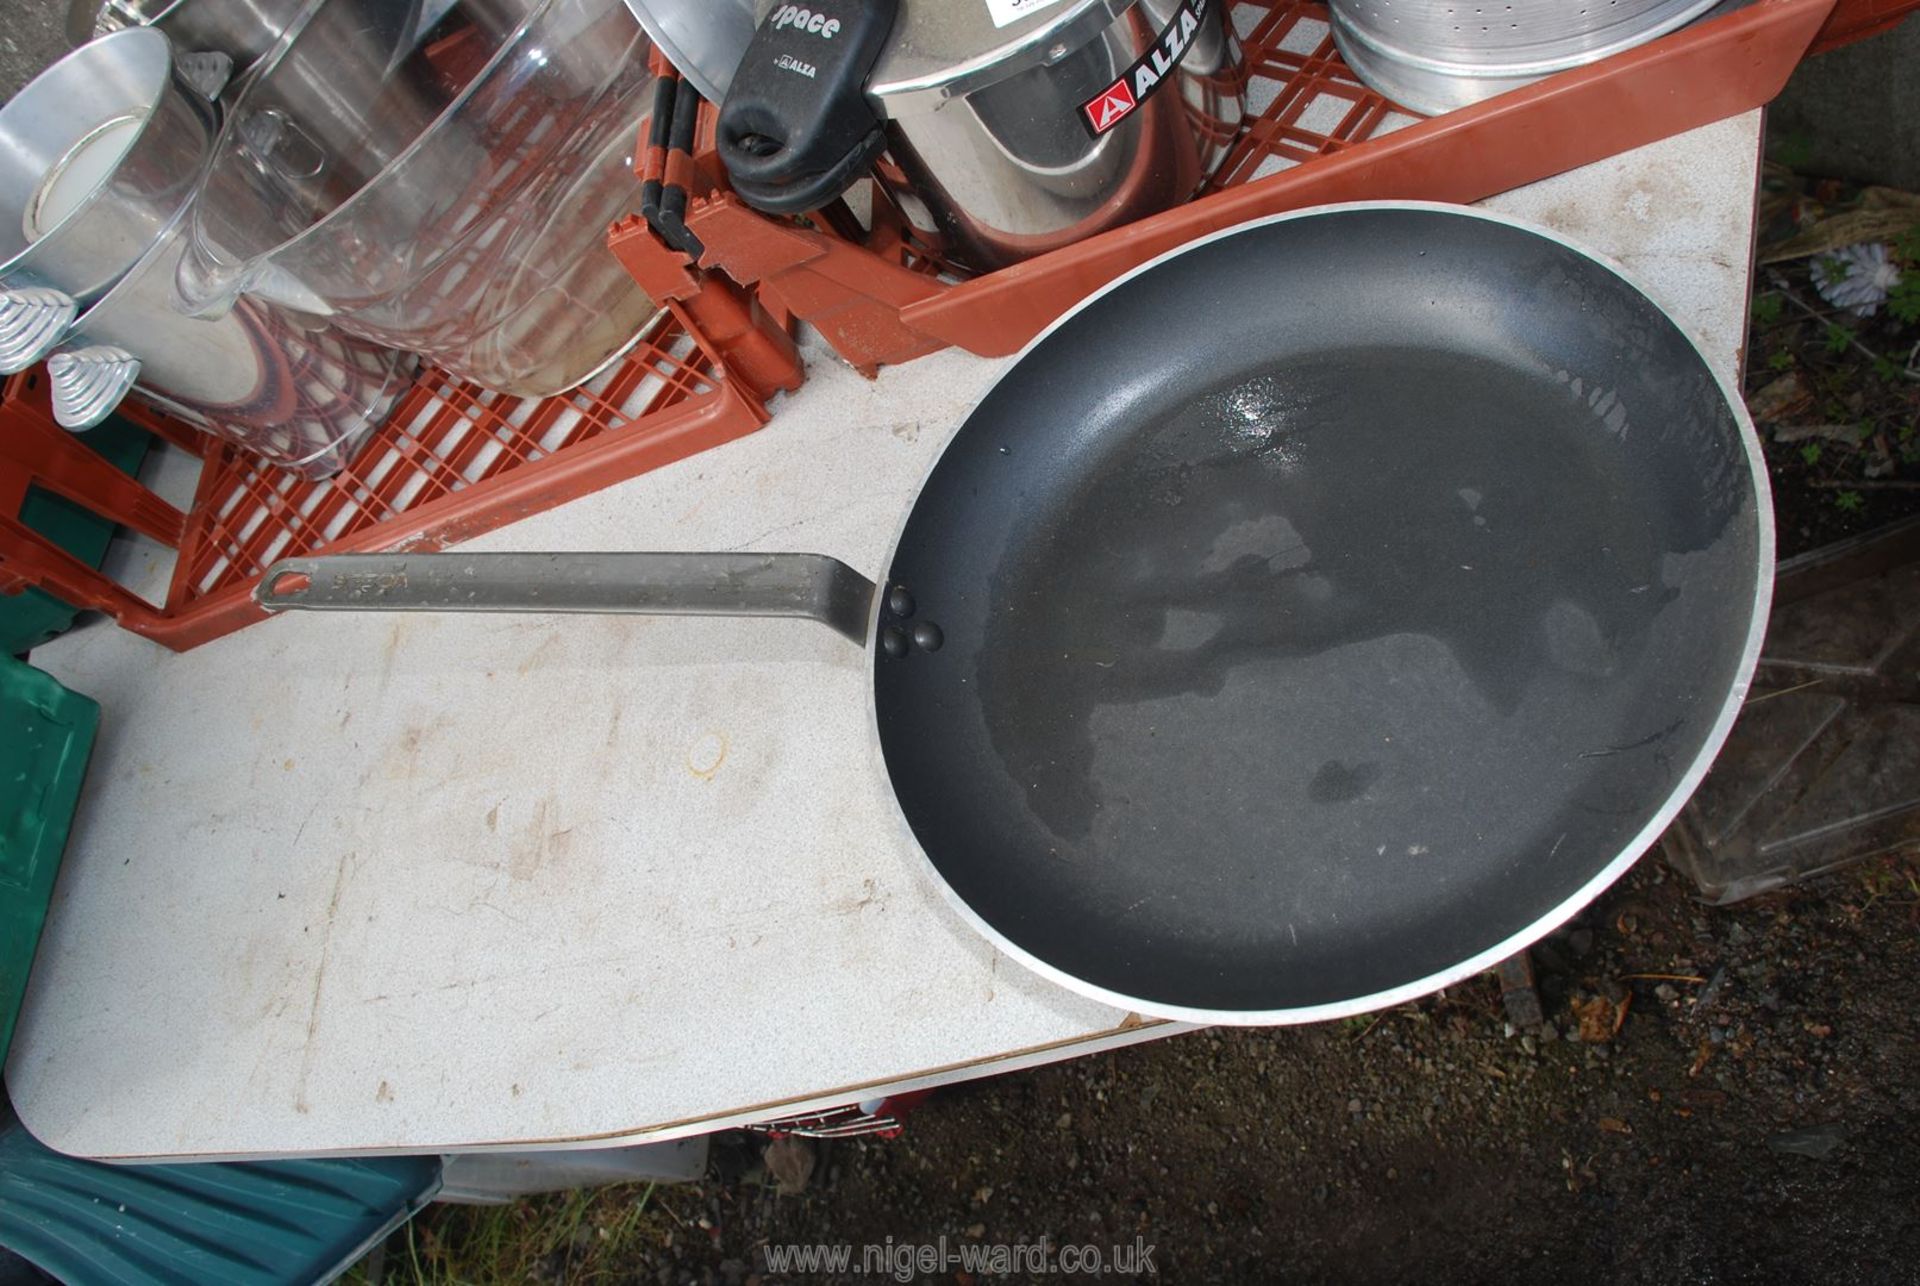 Alza Space steamer, plus large catering saucepans and frying pan, colander etc. - Image 2 of 2